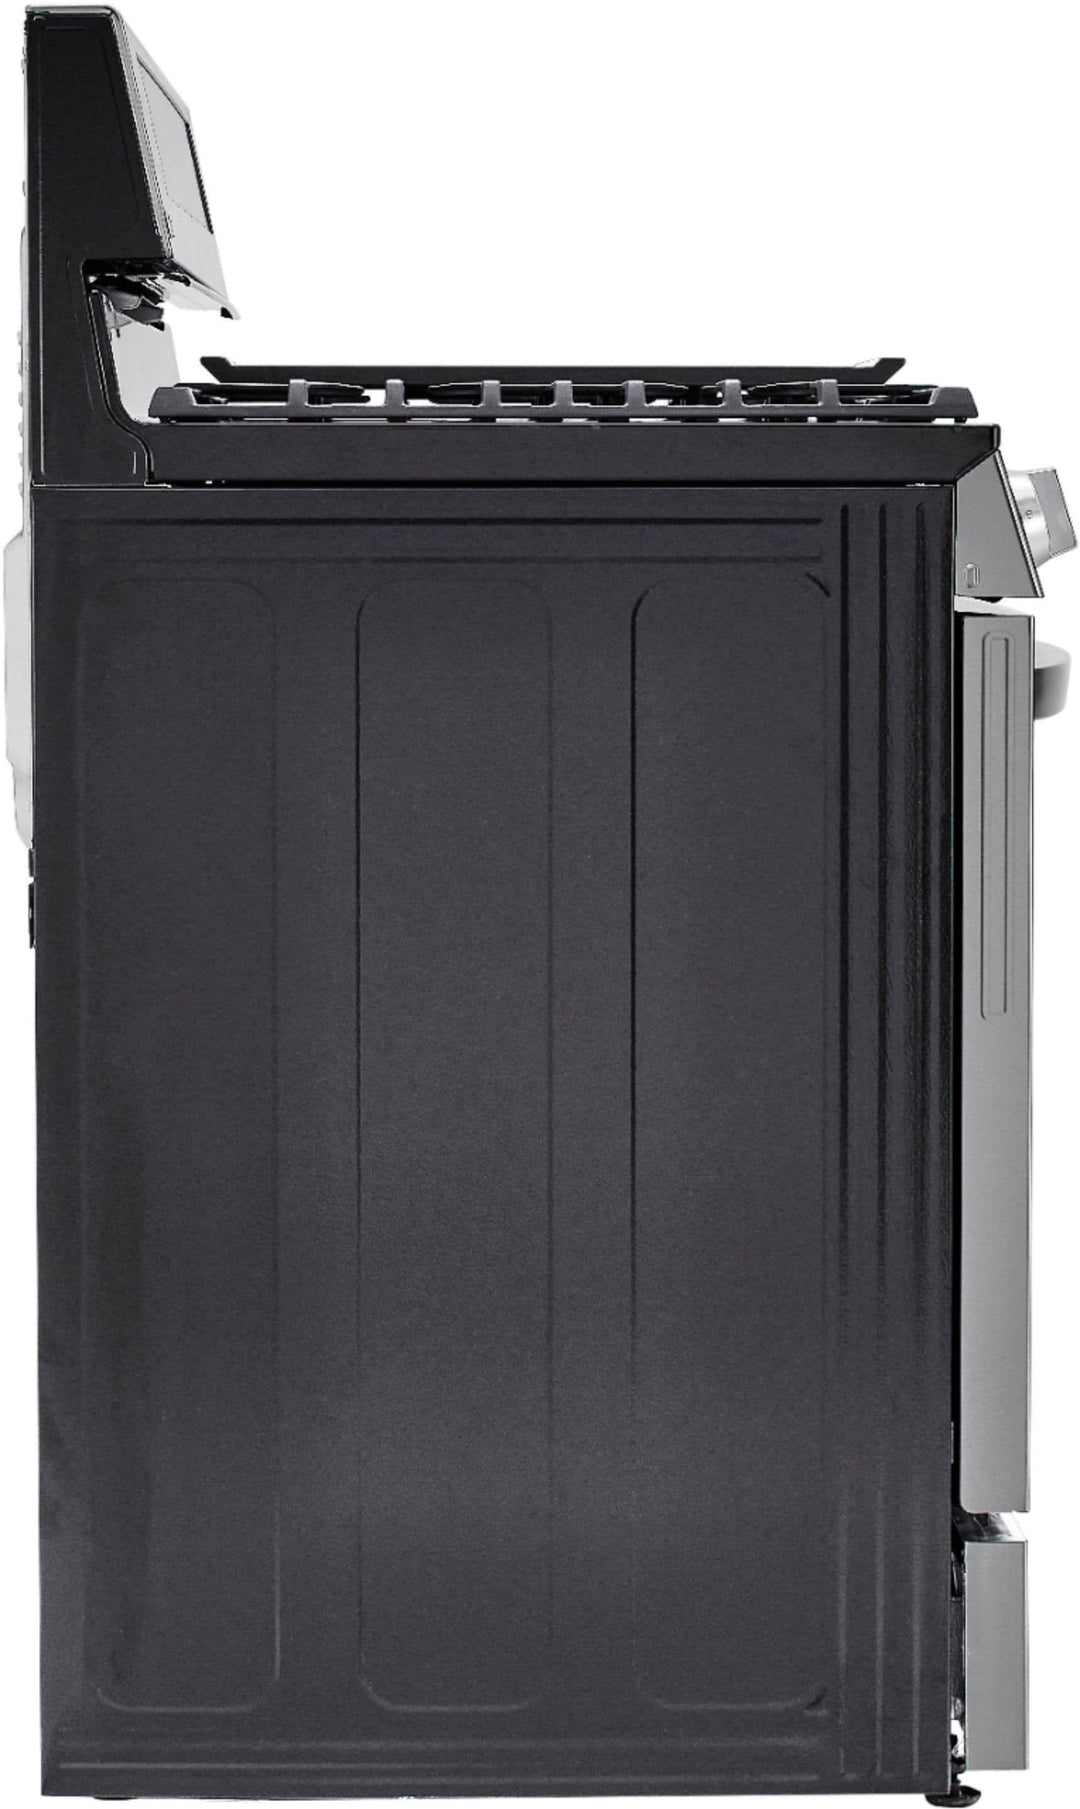 LG - 5.8 Cu. Ft. Freestanding Gas True Convection Range with EasyClean, InstaView and AirFry - Stainless steel_32